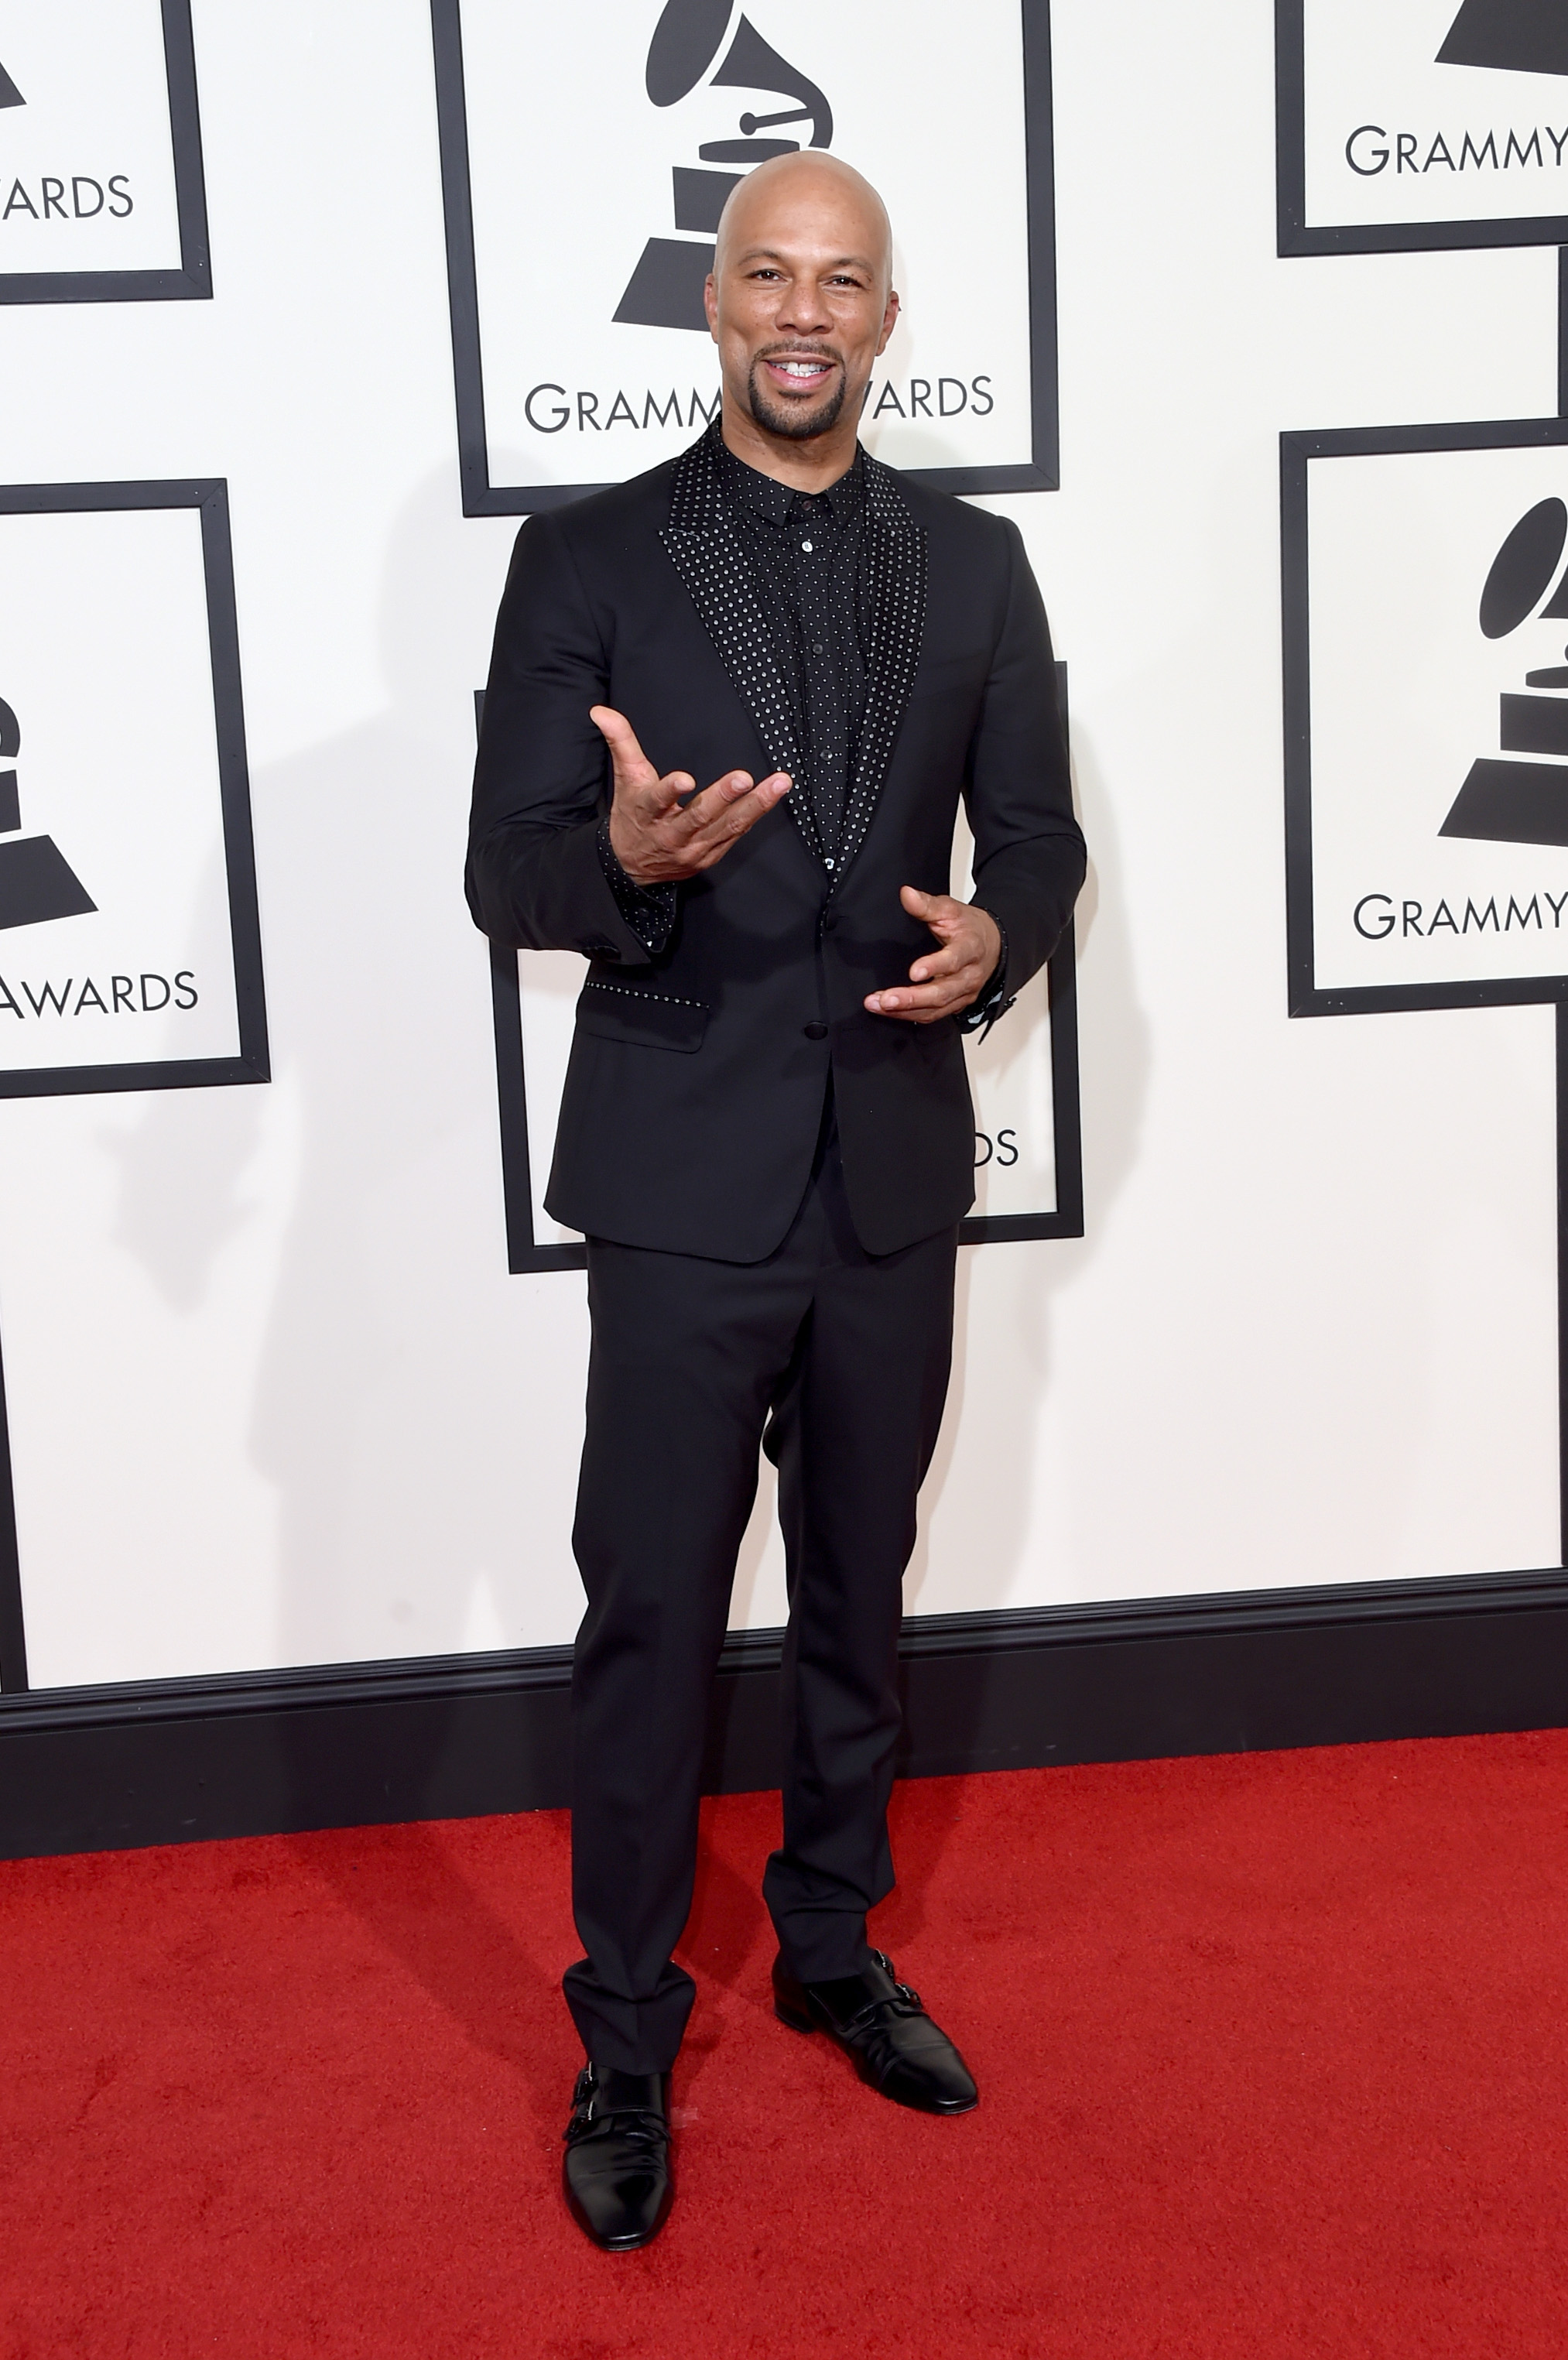 Common attends the 58th GRAMMY Awards at Staples Center on Feb. 15, 2016 in Los Angeles.